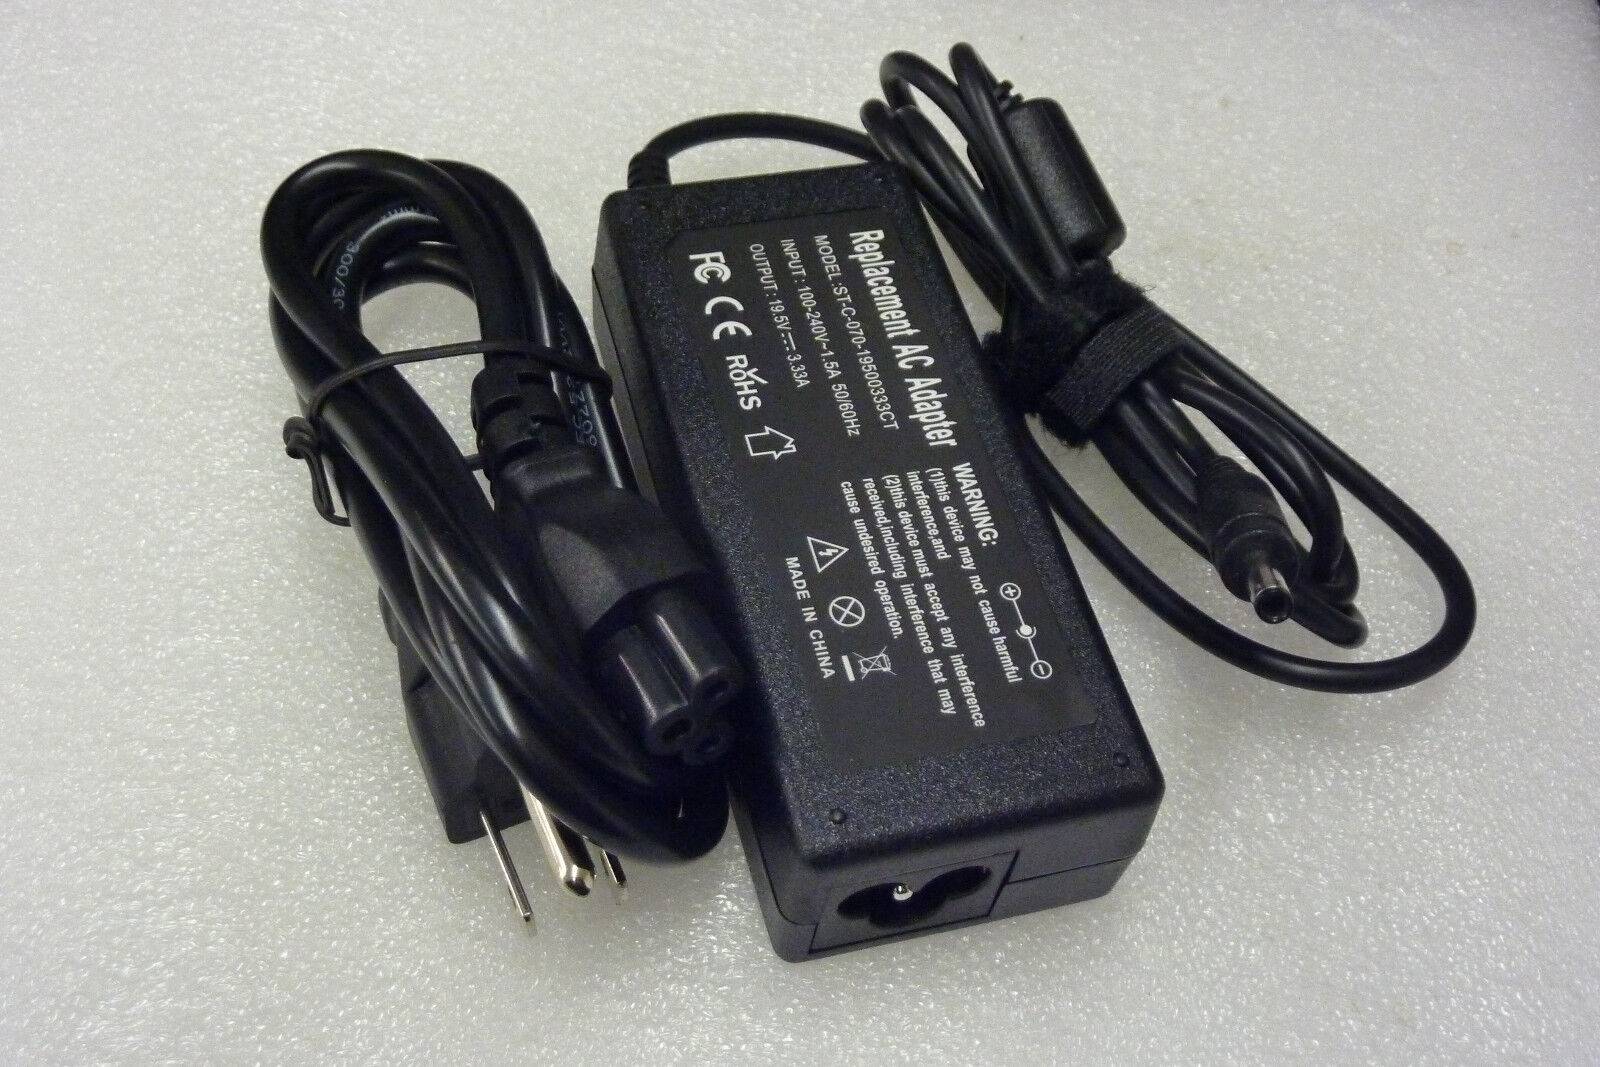 New AC Adapter Charger Power Cord For HP Elite x2 1011 G1 Tablet L8D81UT L8D77UT